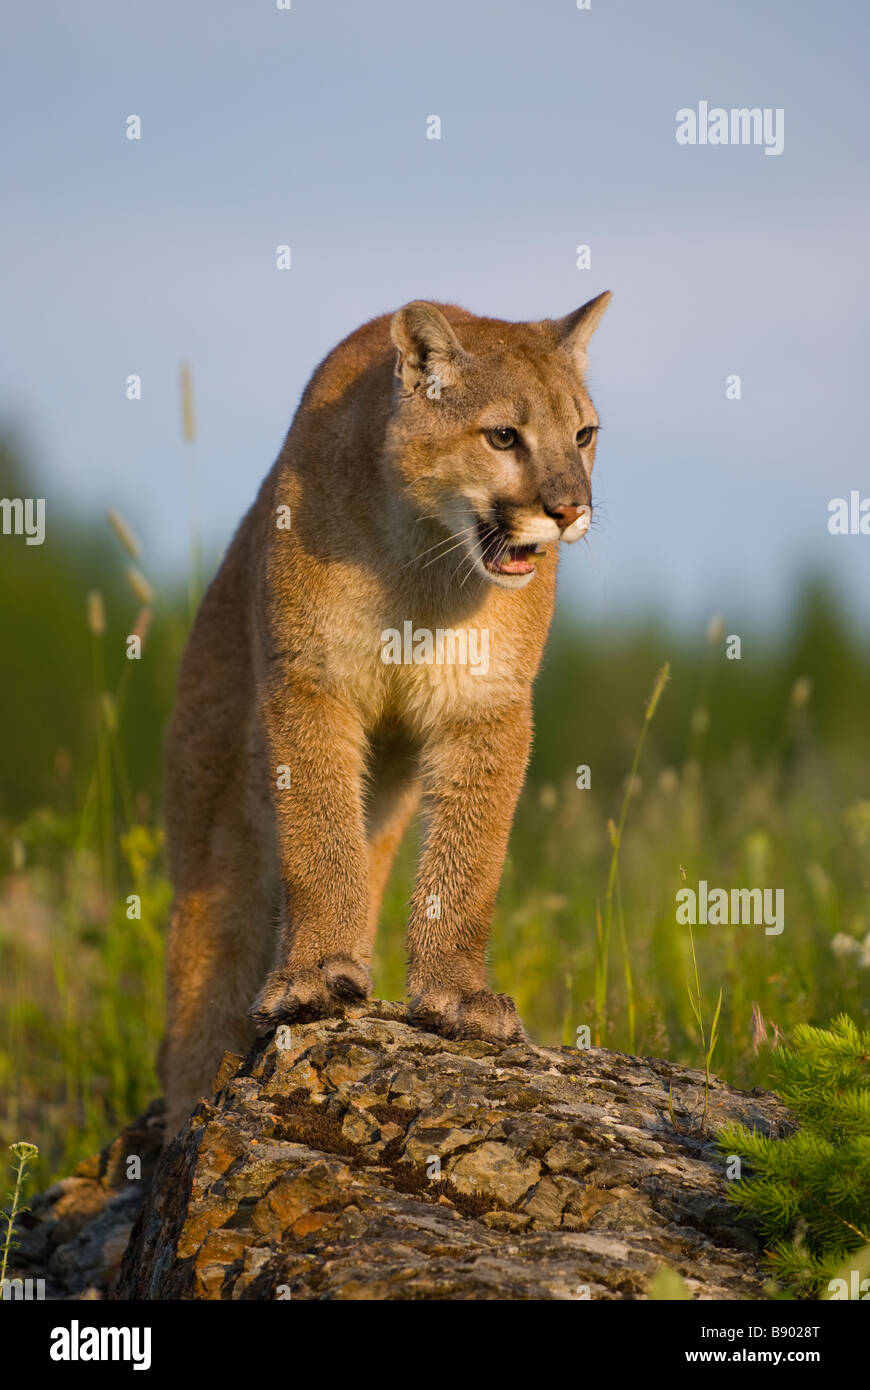 Mountain lion standing on a rock looking out over a field Stock Photo